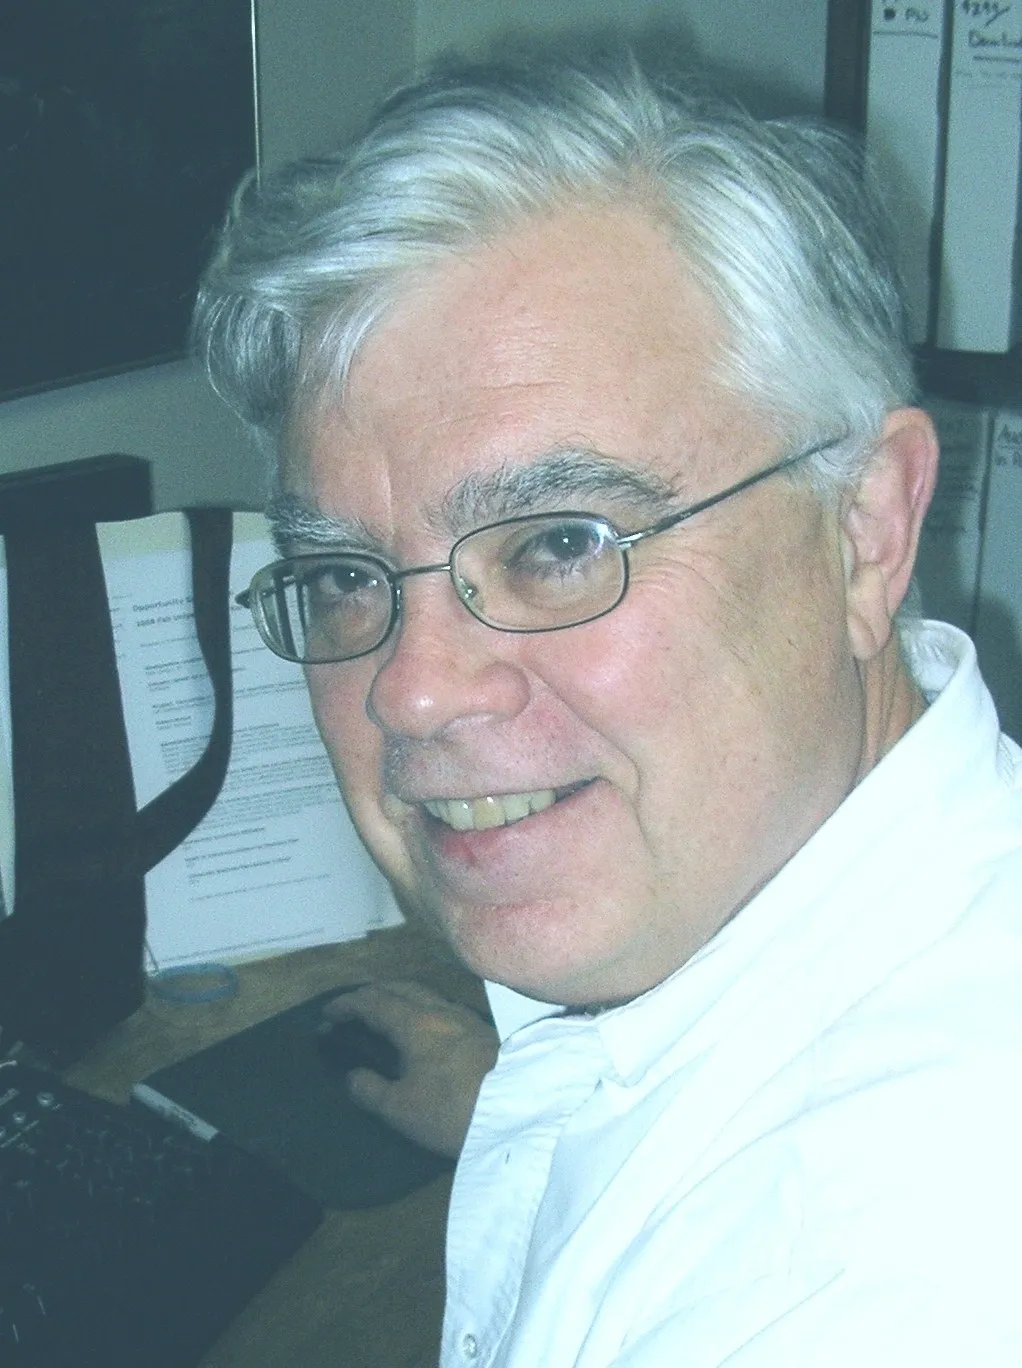 A man with glasses and white hair sitting at a desk.